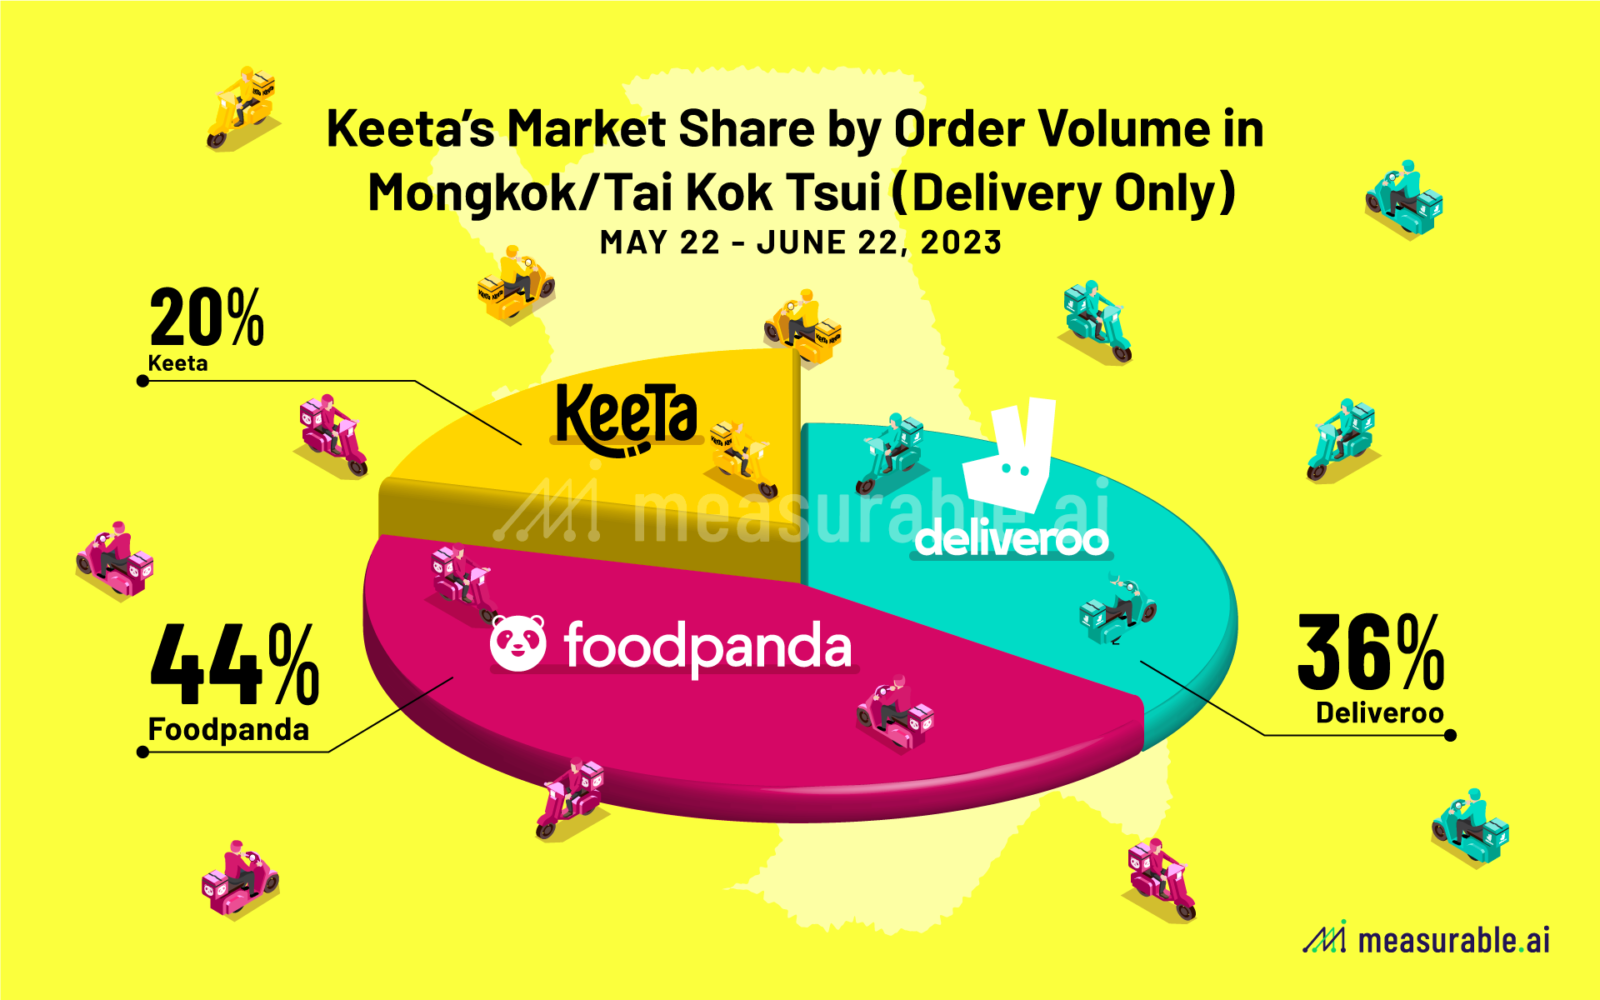 KeeTa;s Market Share by Order Volume in Mongkok / Tai Kok Tsui (Delivery Only)